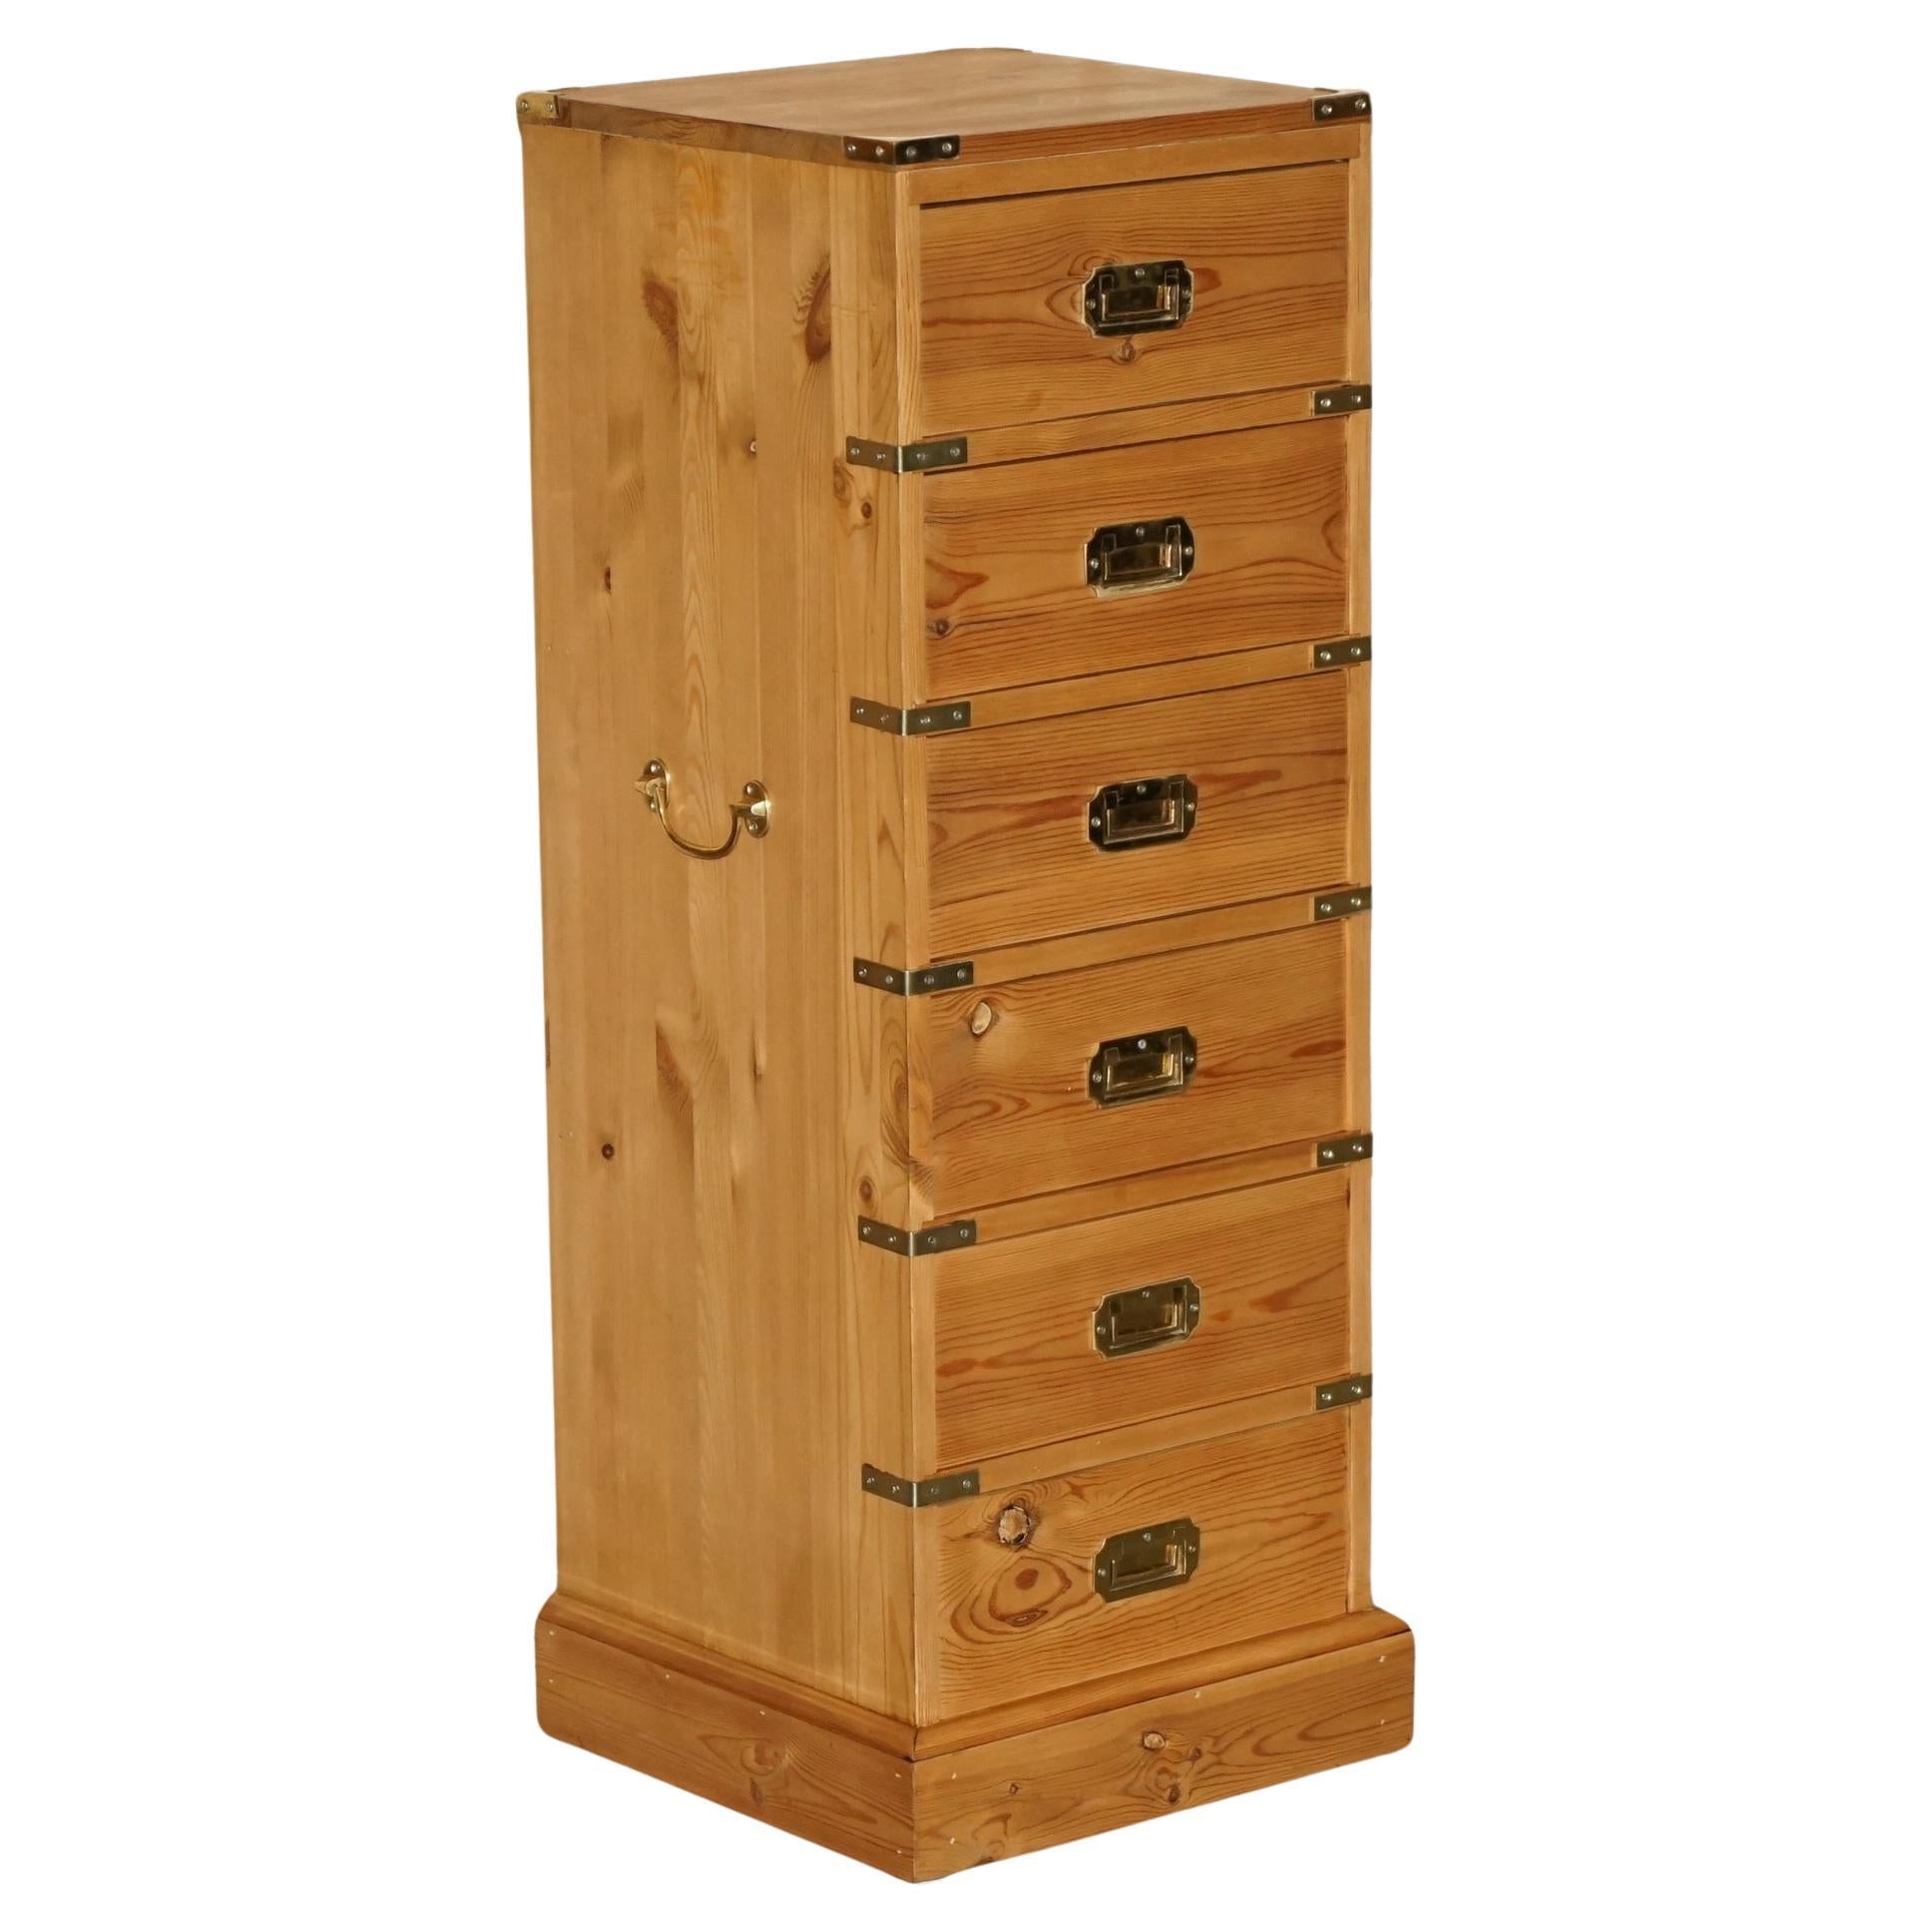 What is a tall chest of drawers called?